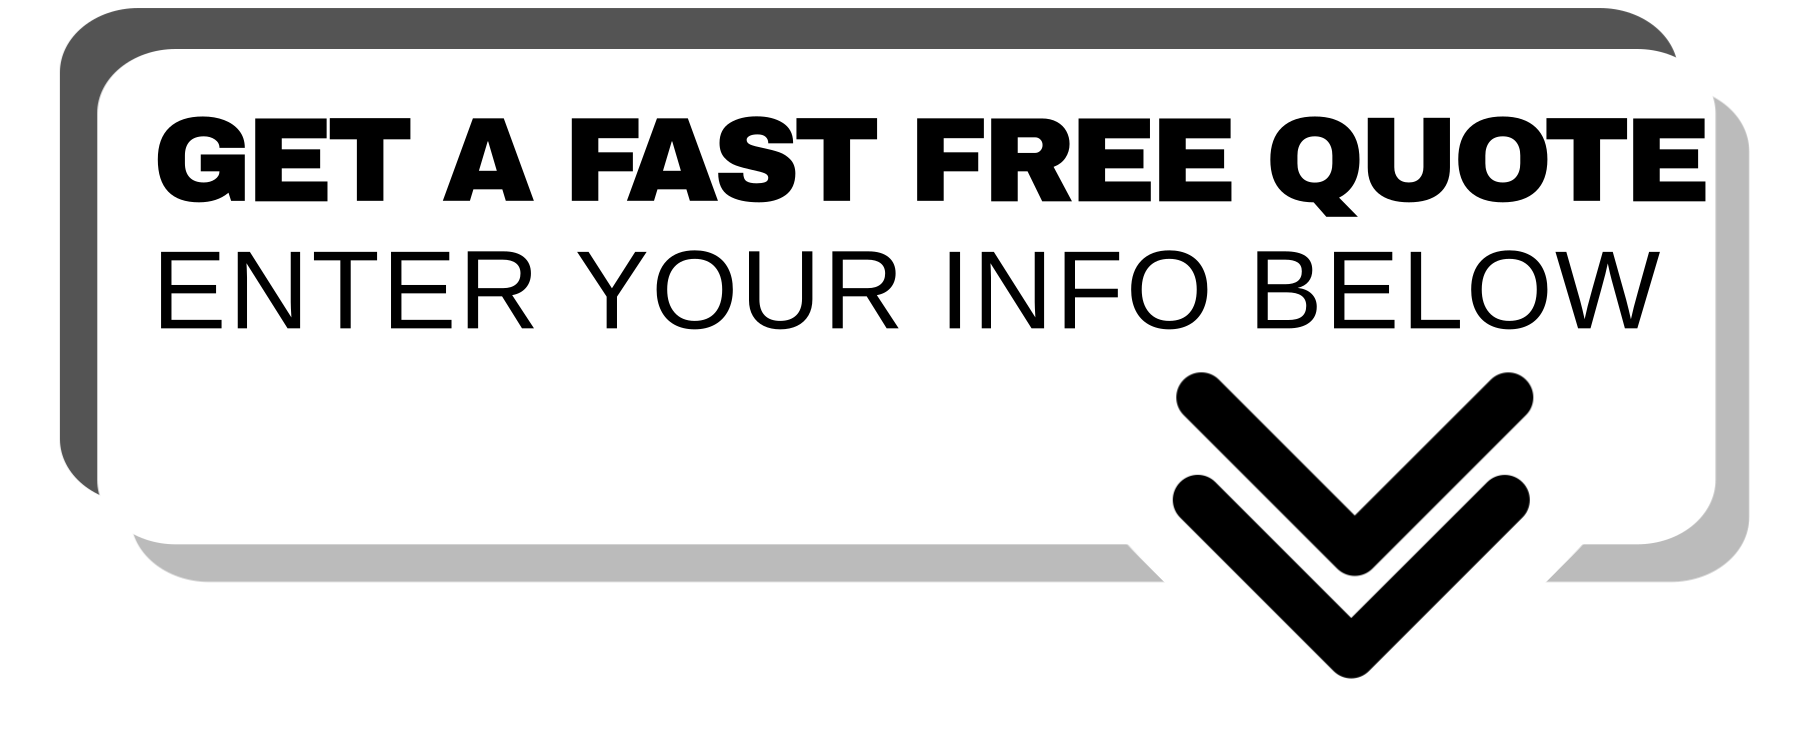 Fast free quote banner over contact form